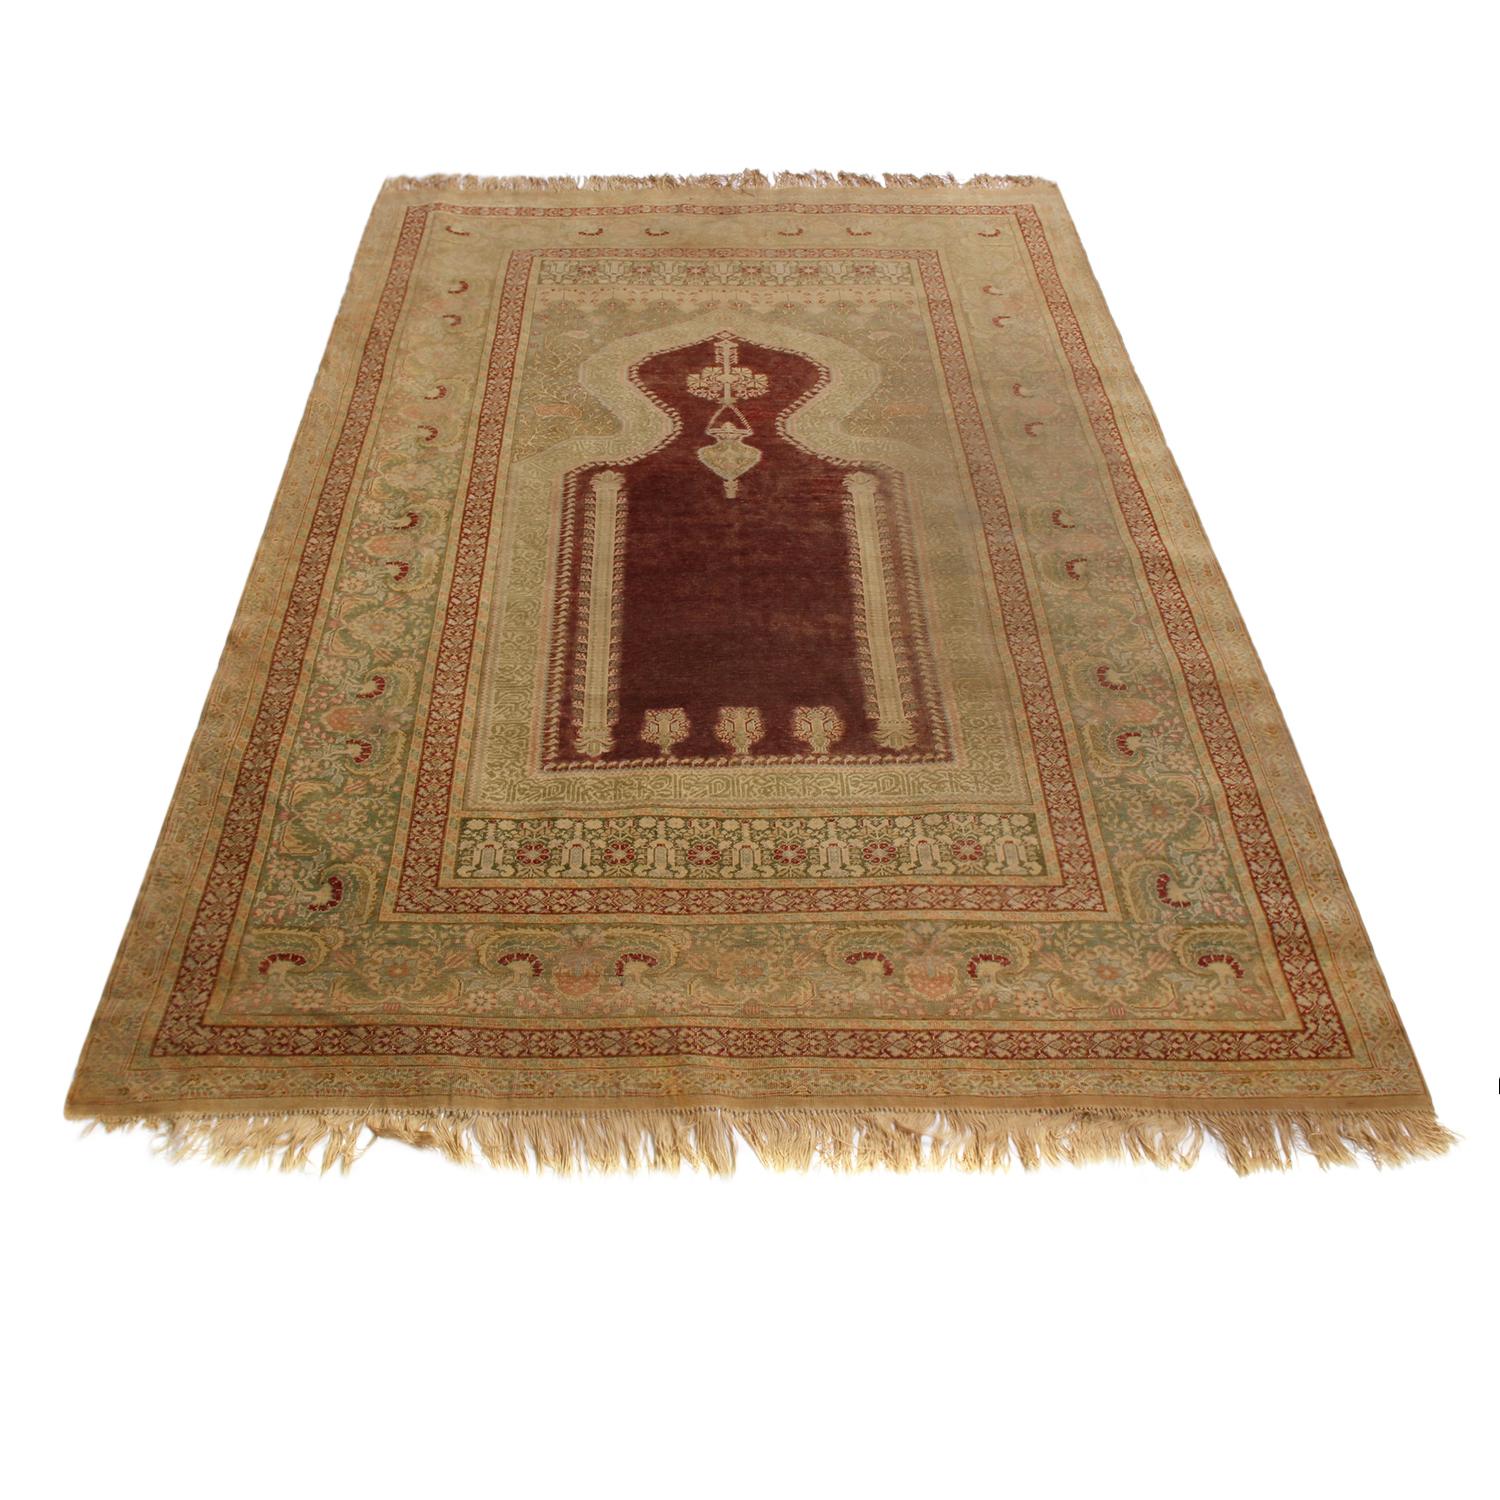 Hand knotted in high-quality wool originating from Turkey in 1870, this antique Kayseri rug enjoys an engaging, rich shade of burgundy complementing the more forgiving tea green and beige colorways, balancing the visual gravity of the central mihrab